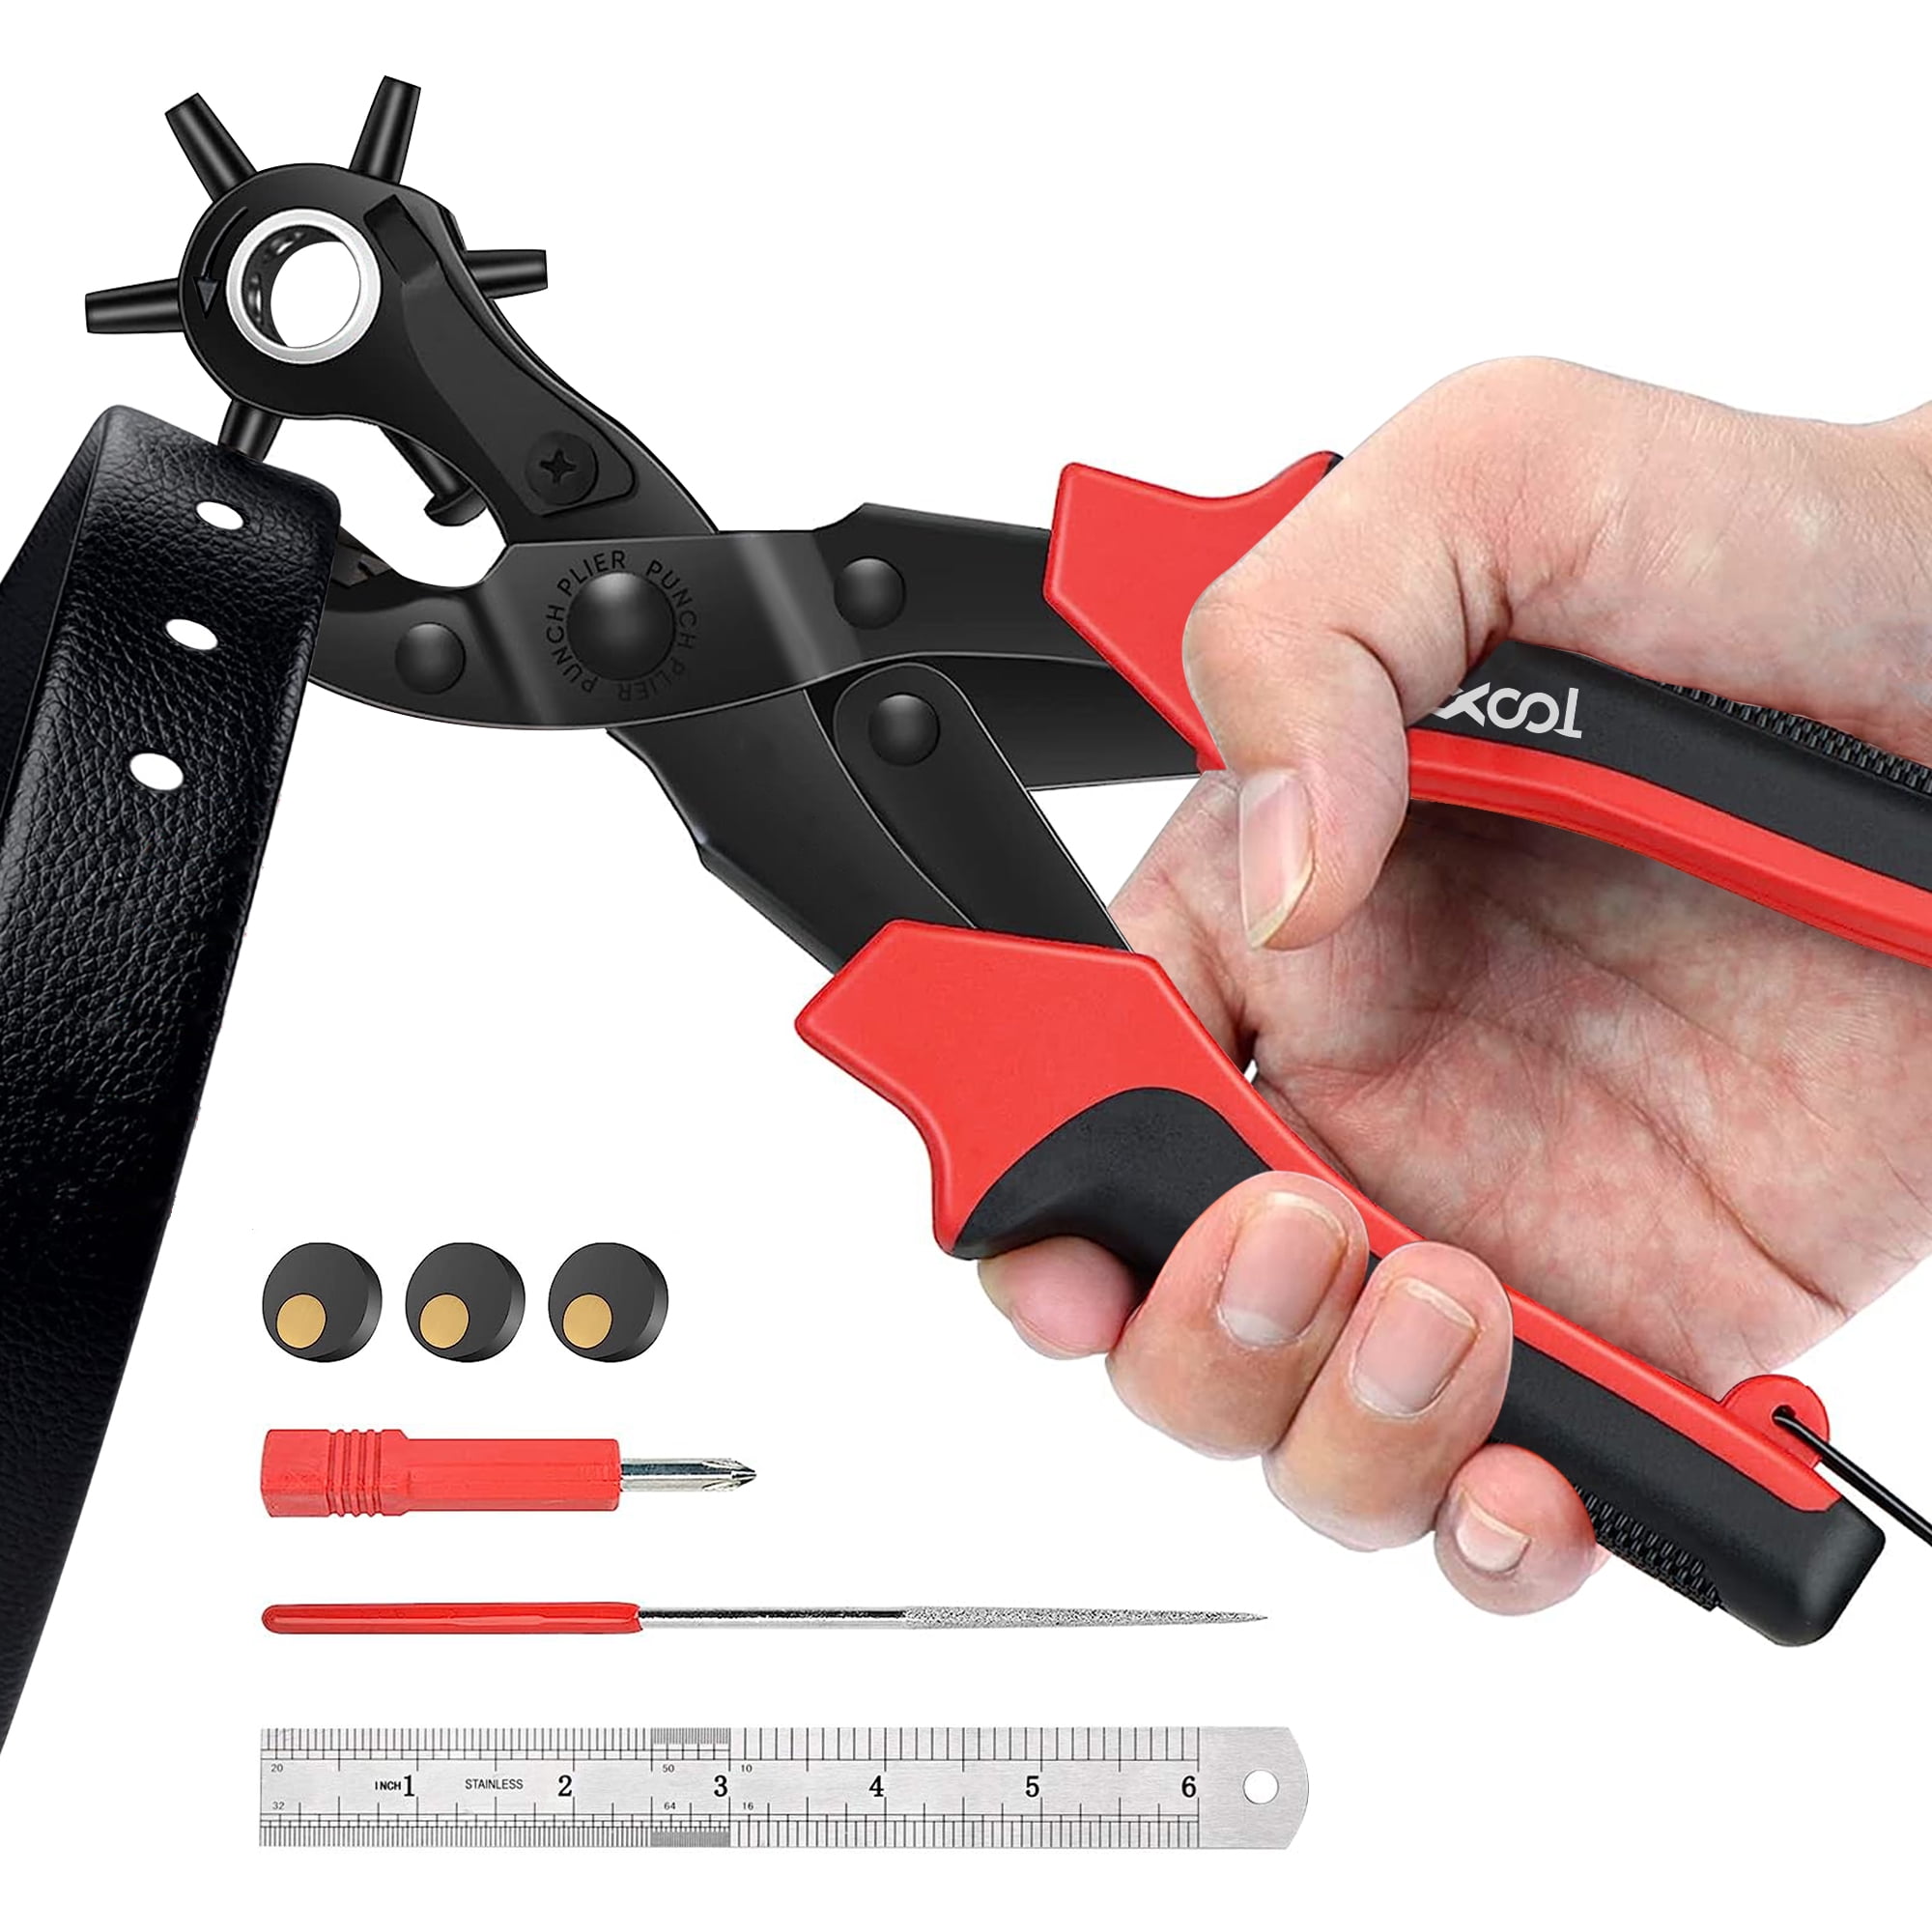 Europower Large Hole Punch Pliers with 7 Popular Sizes, PLR-137.00